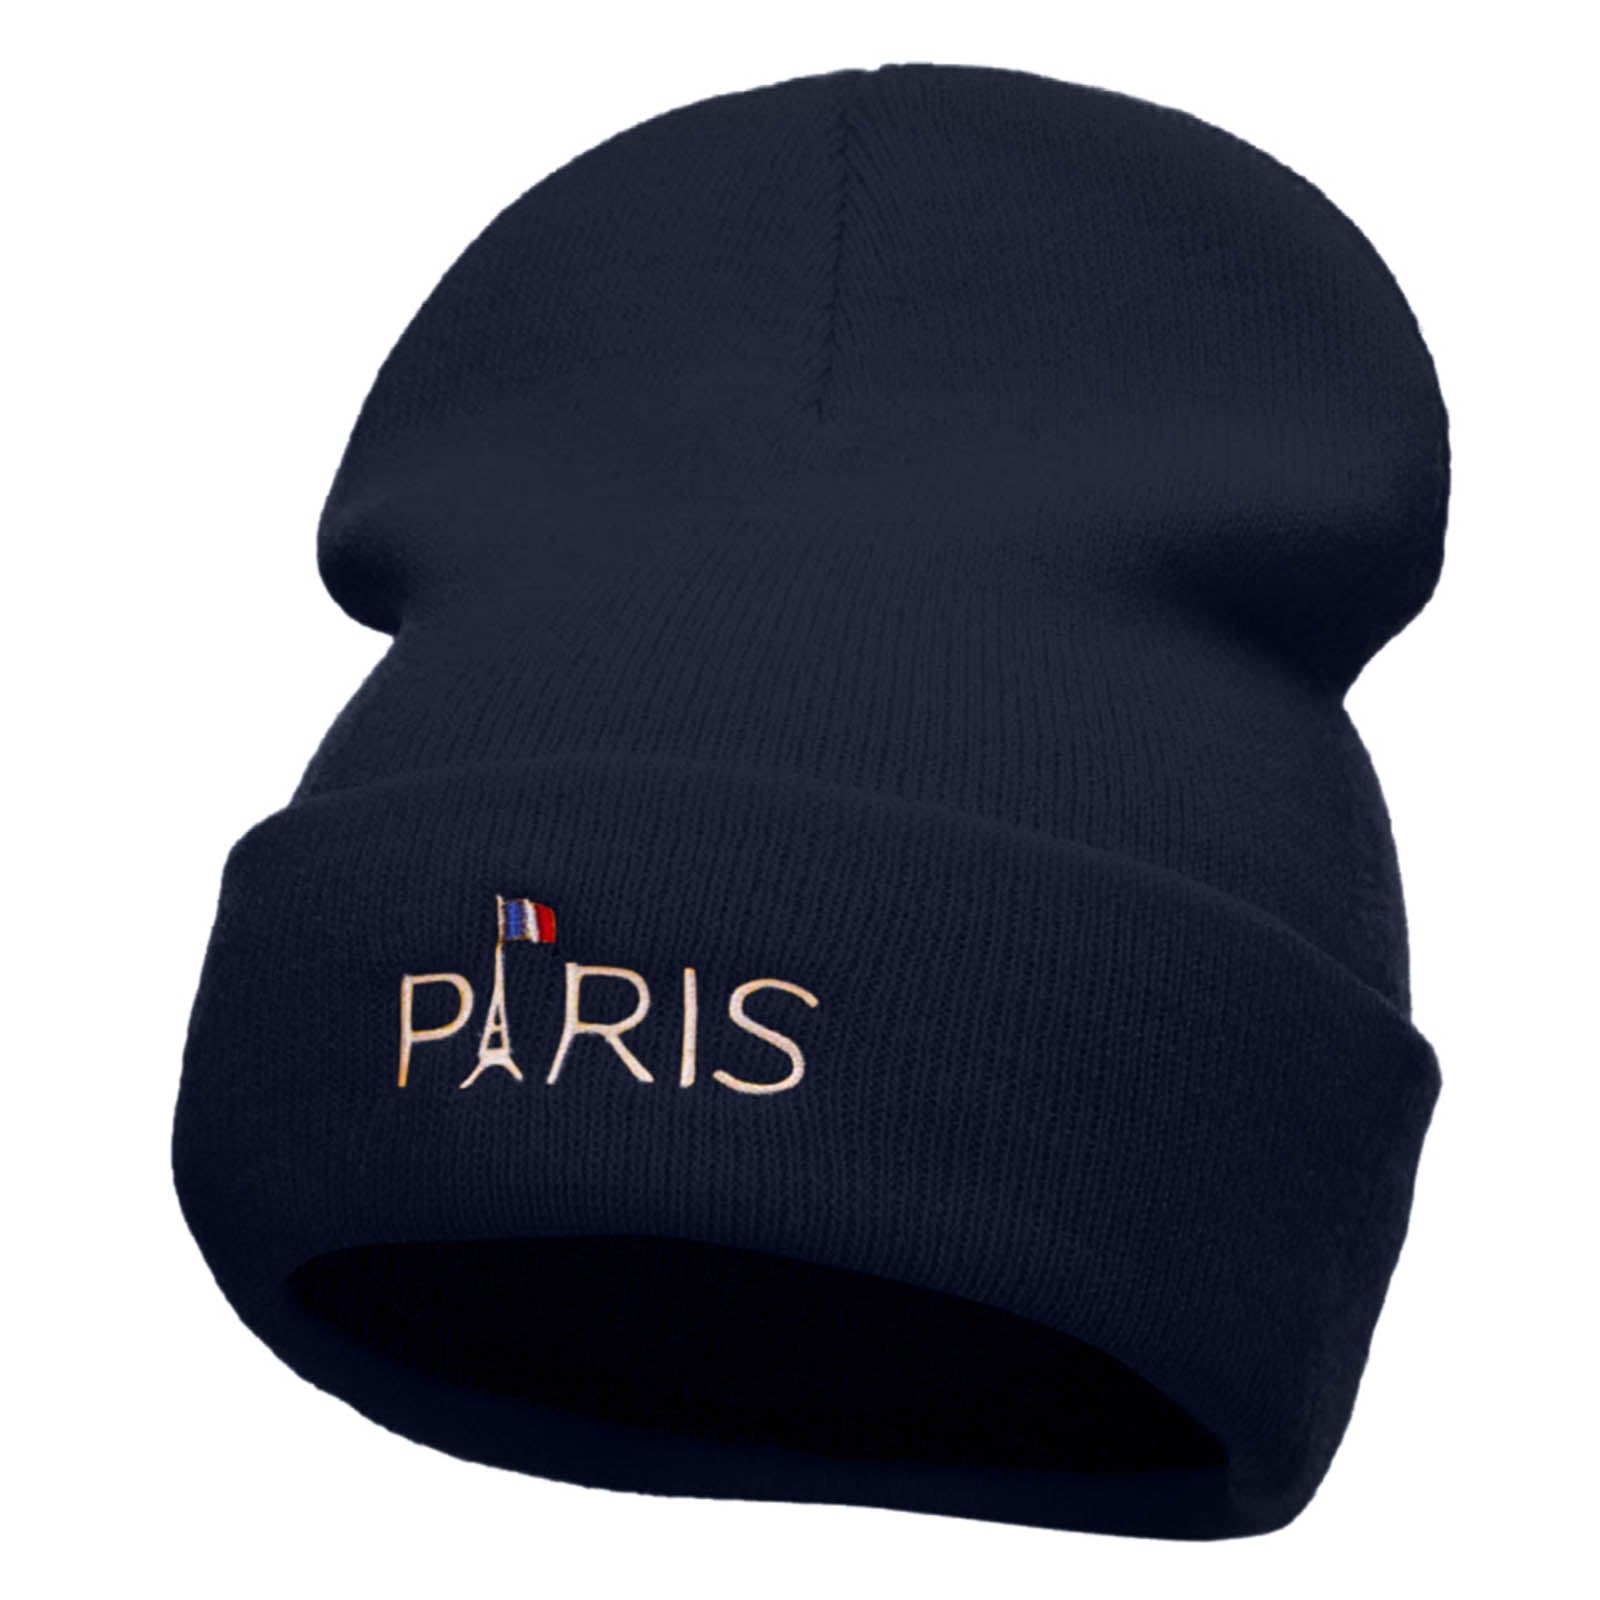 Eiffle Tower Paris Embroidered 12 Inch Long Knitted Beanie - Navy OSFM